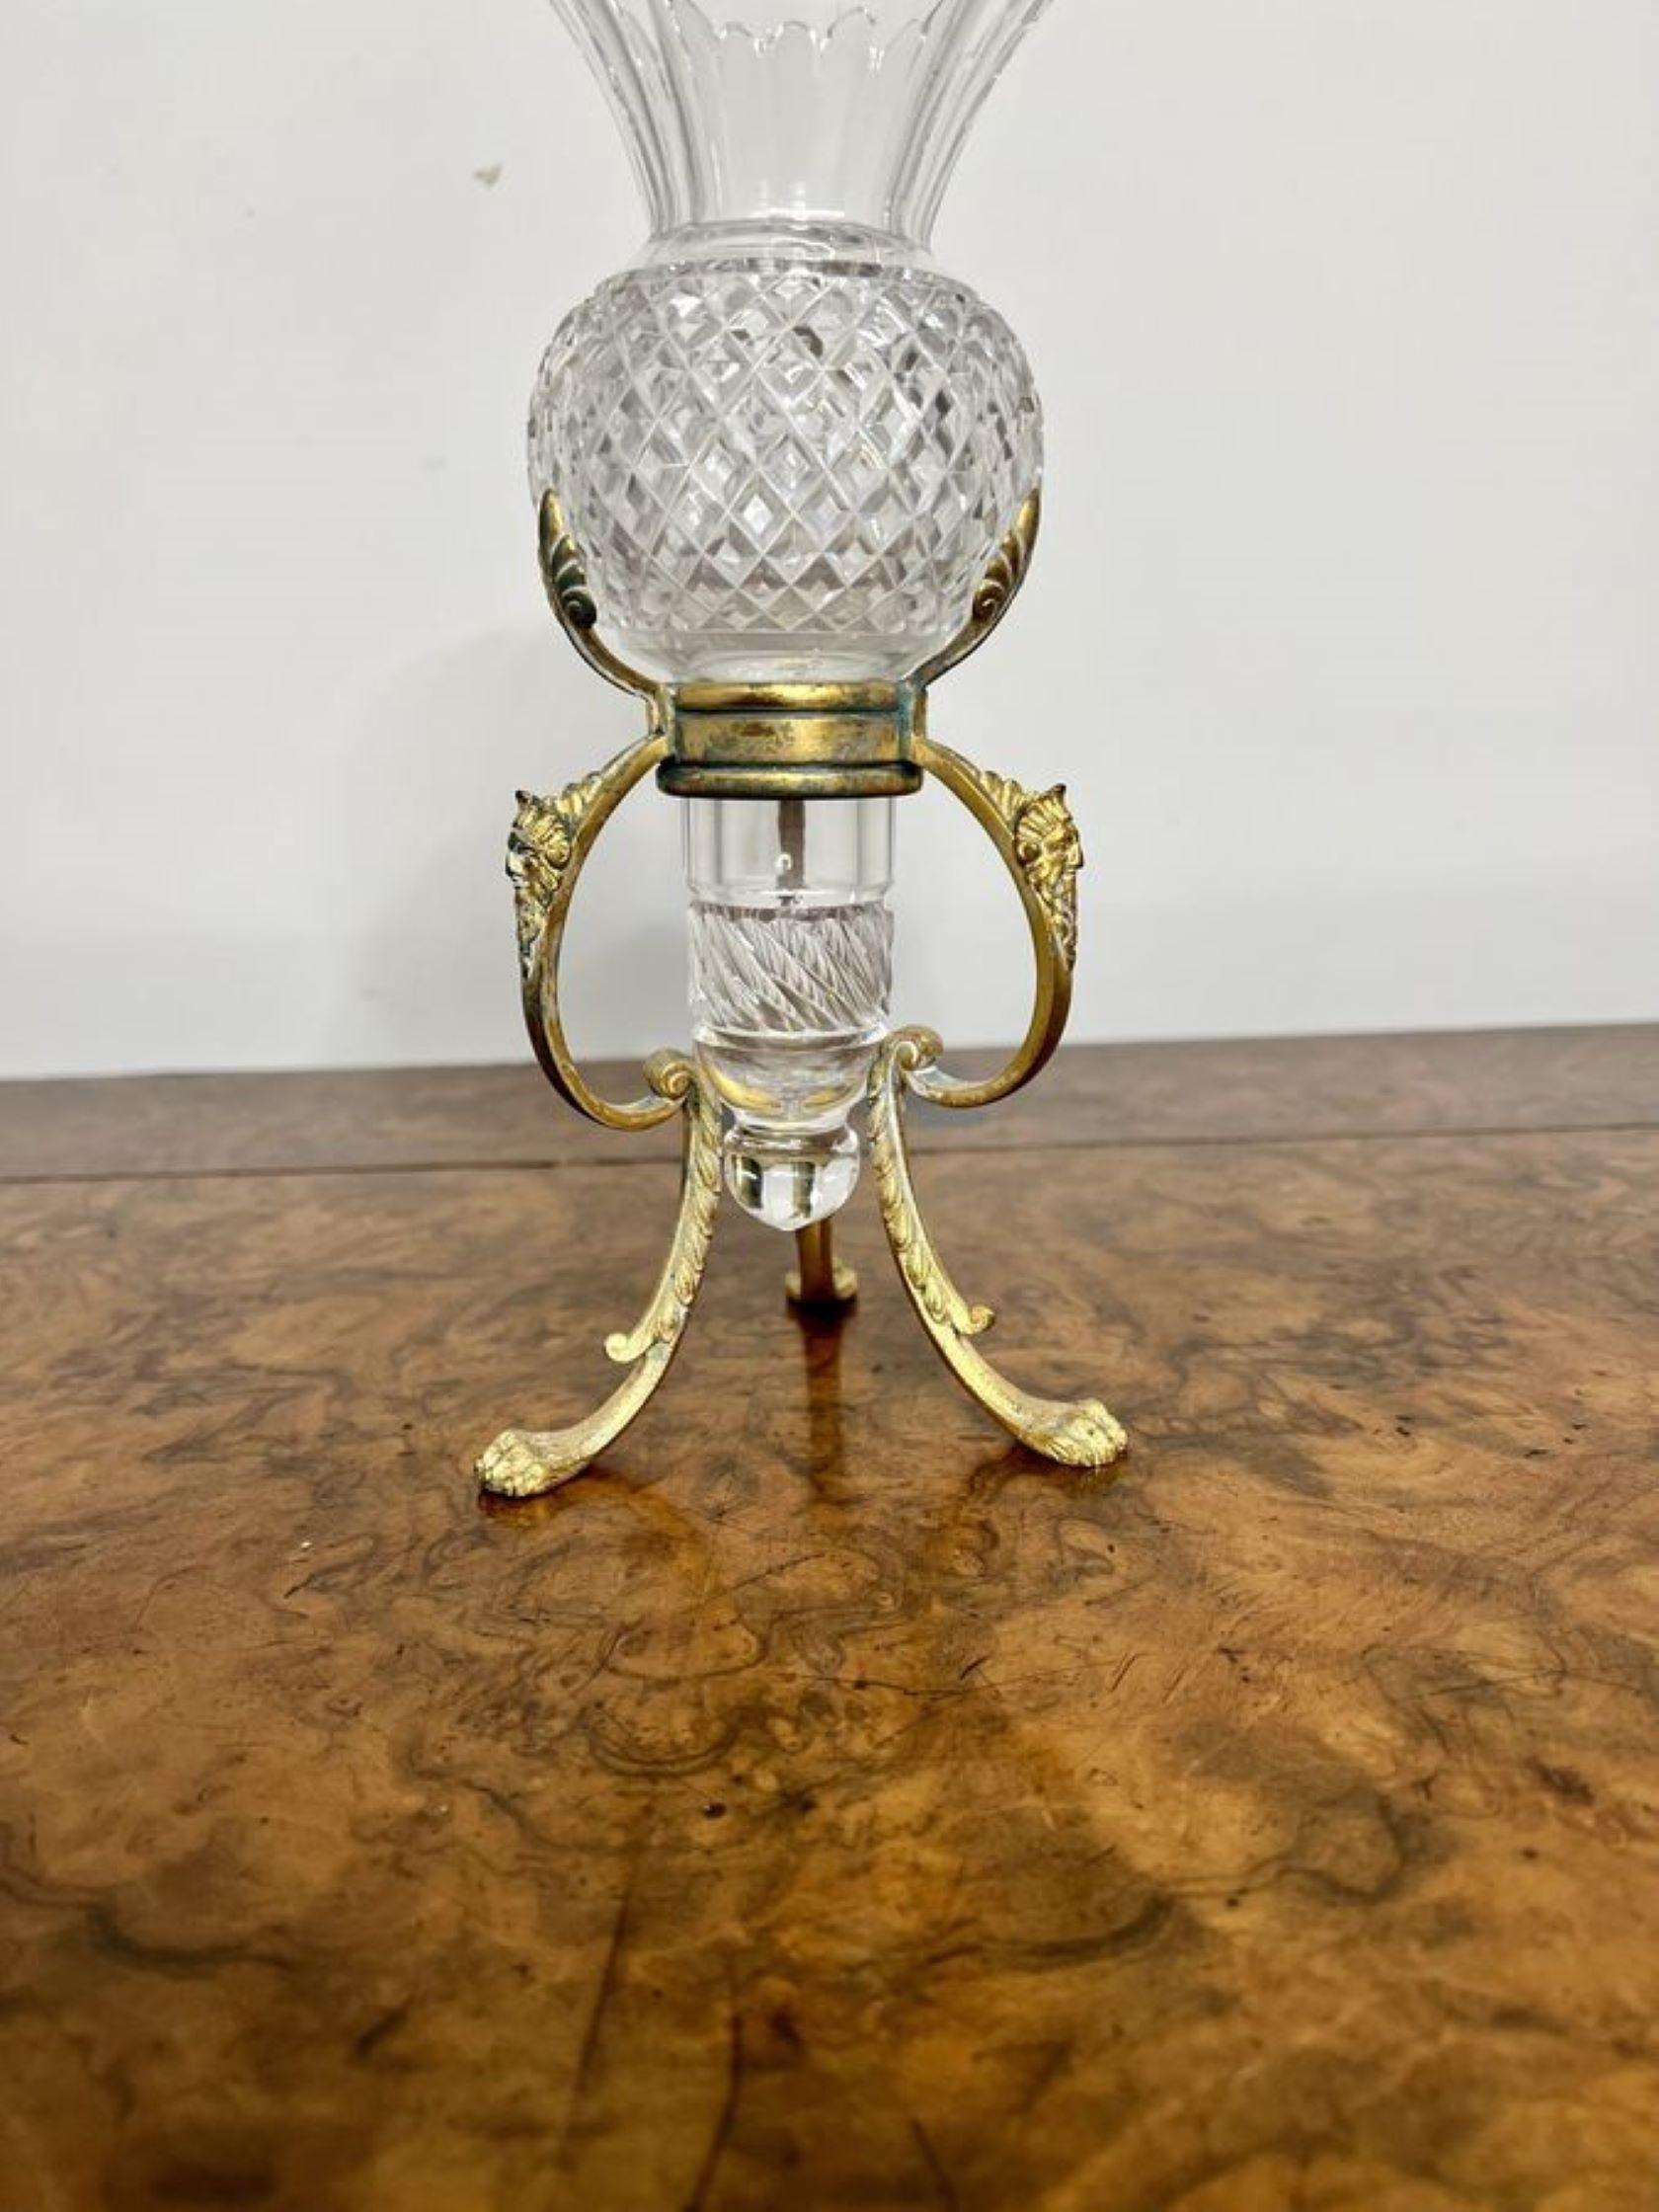 Lovely antique cut glass vase on an ornate stand having a quality cut glass removable vase with a fantastic fluted shaped top on a ornate metal stand raised on paw feet.

D. 1900